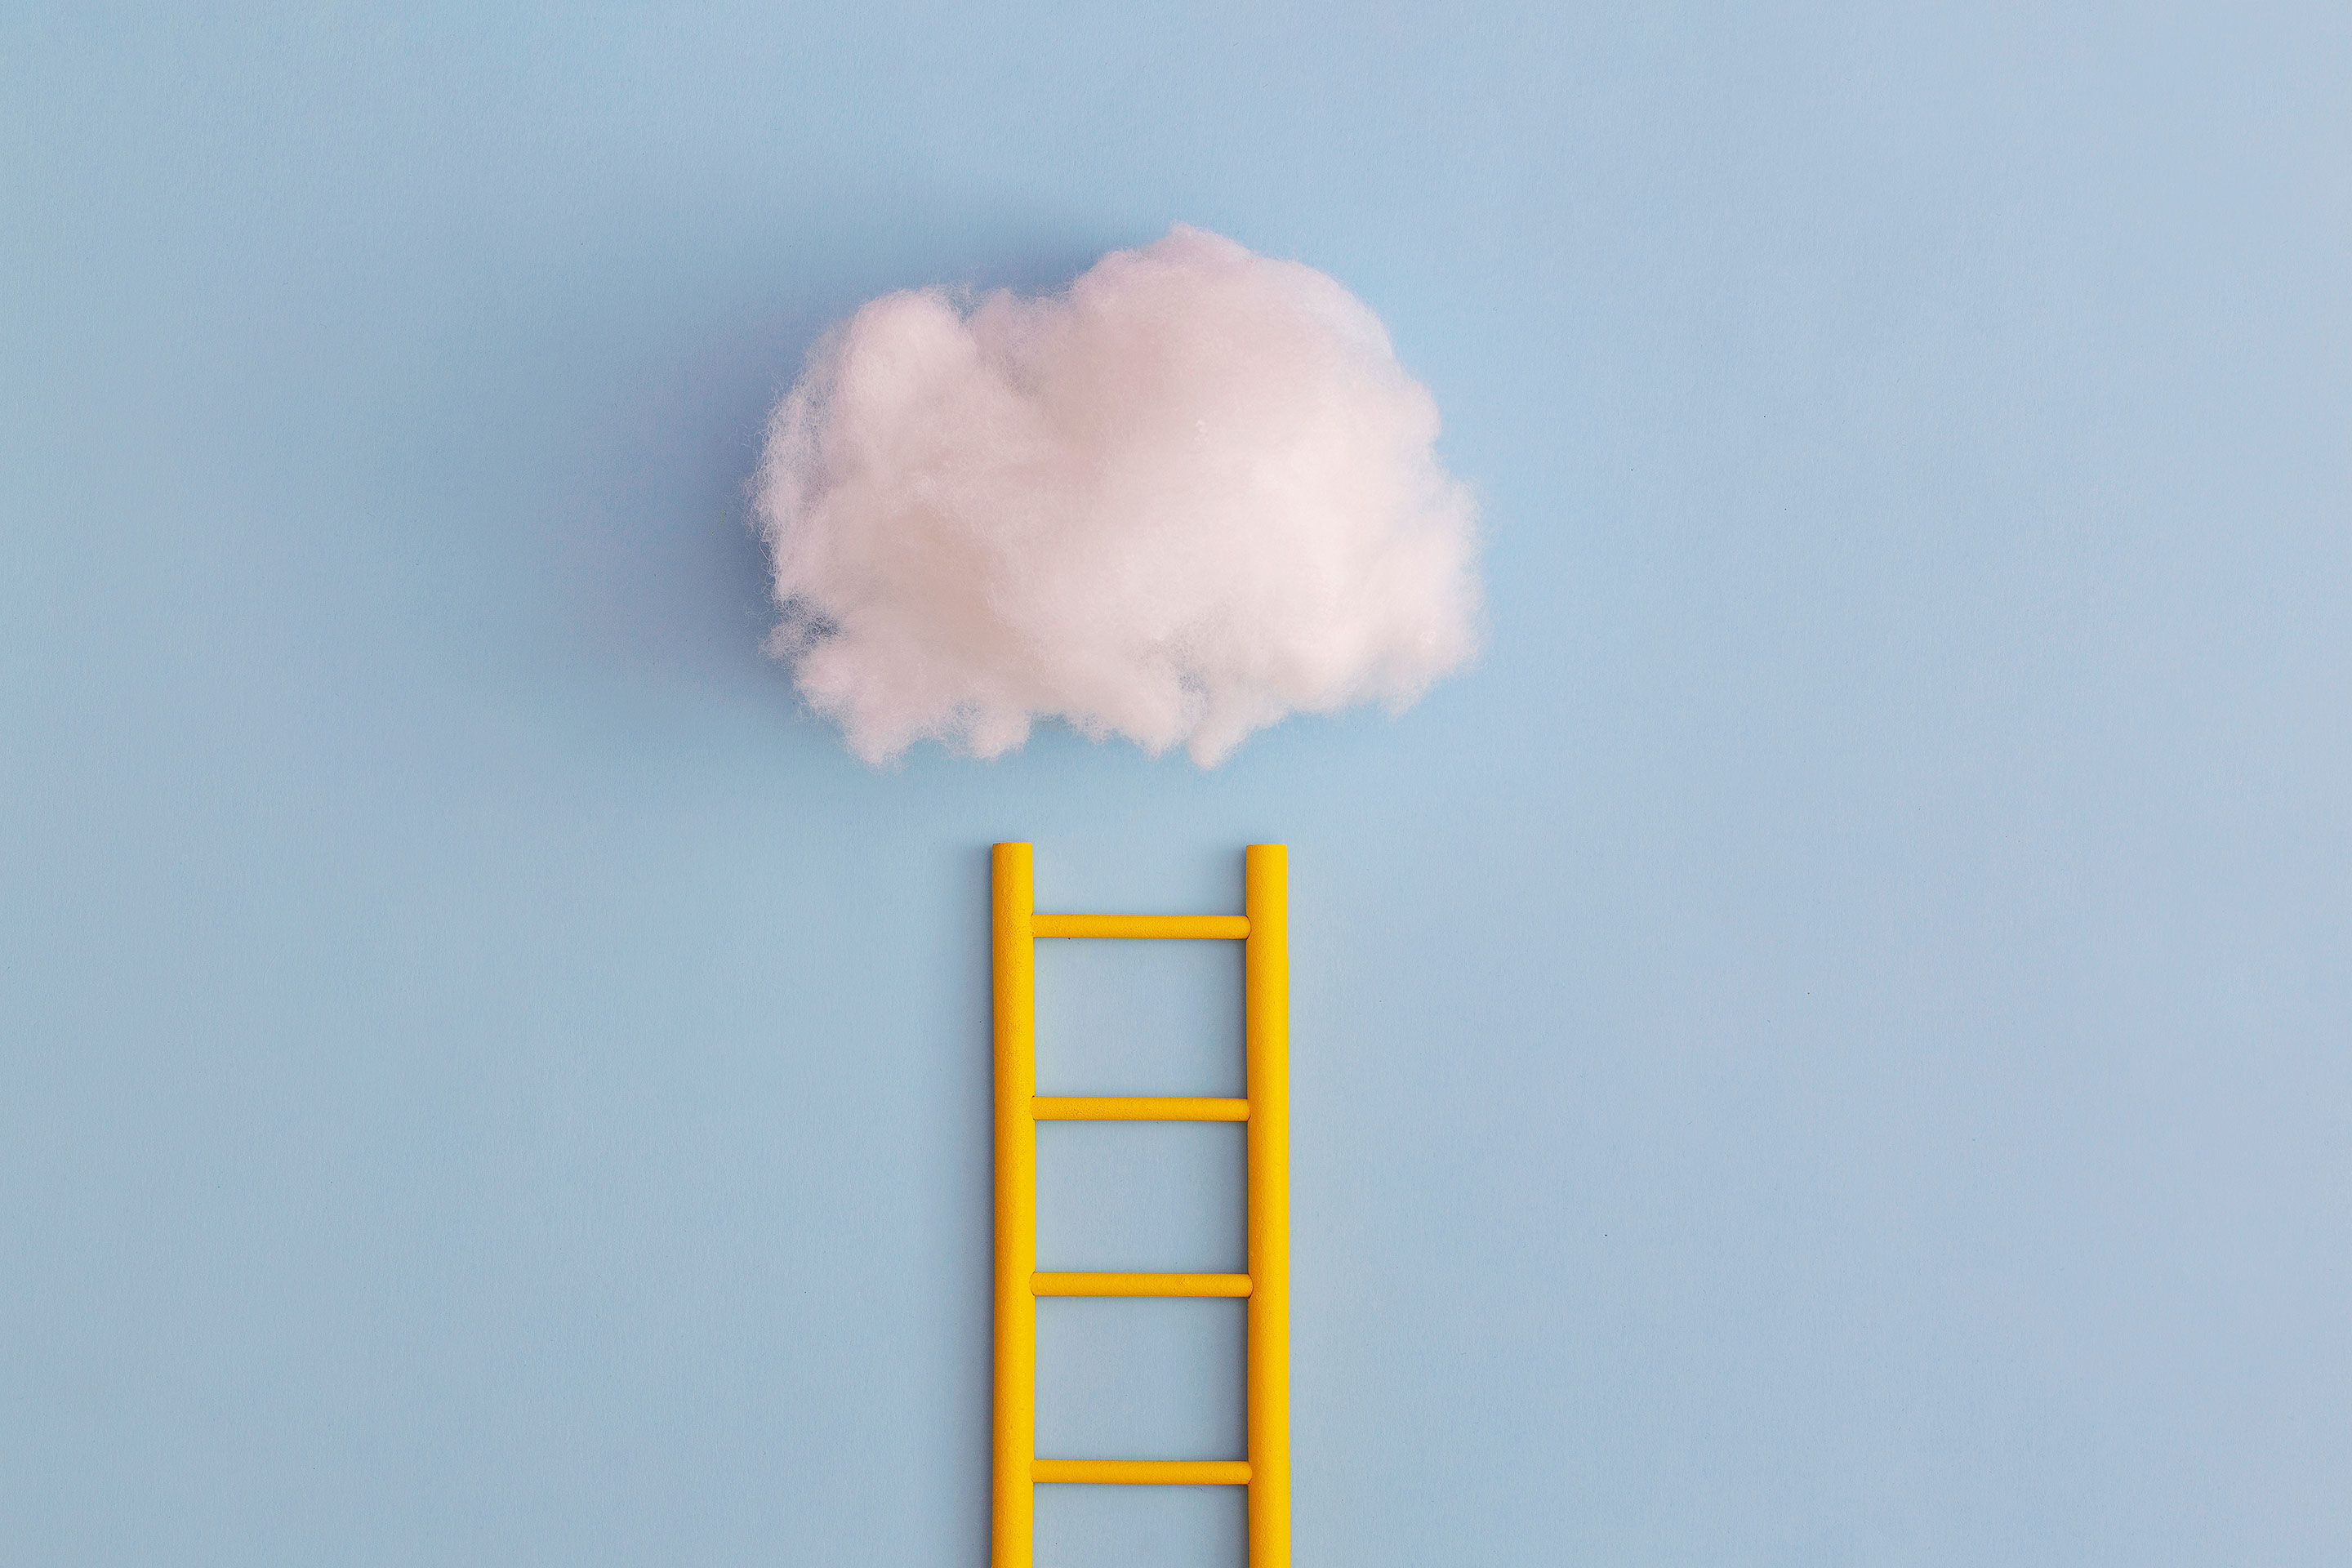 A bright yellow ladder reaches to a cloud, indicating reaching high goals